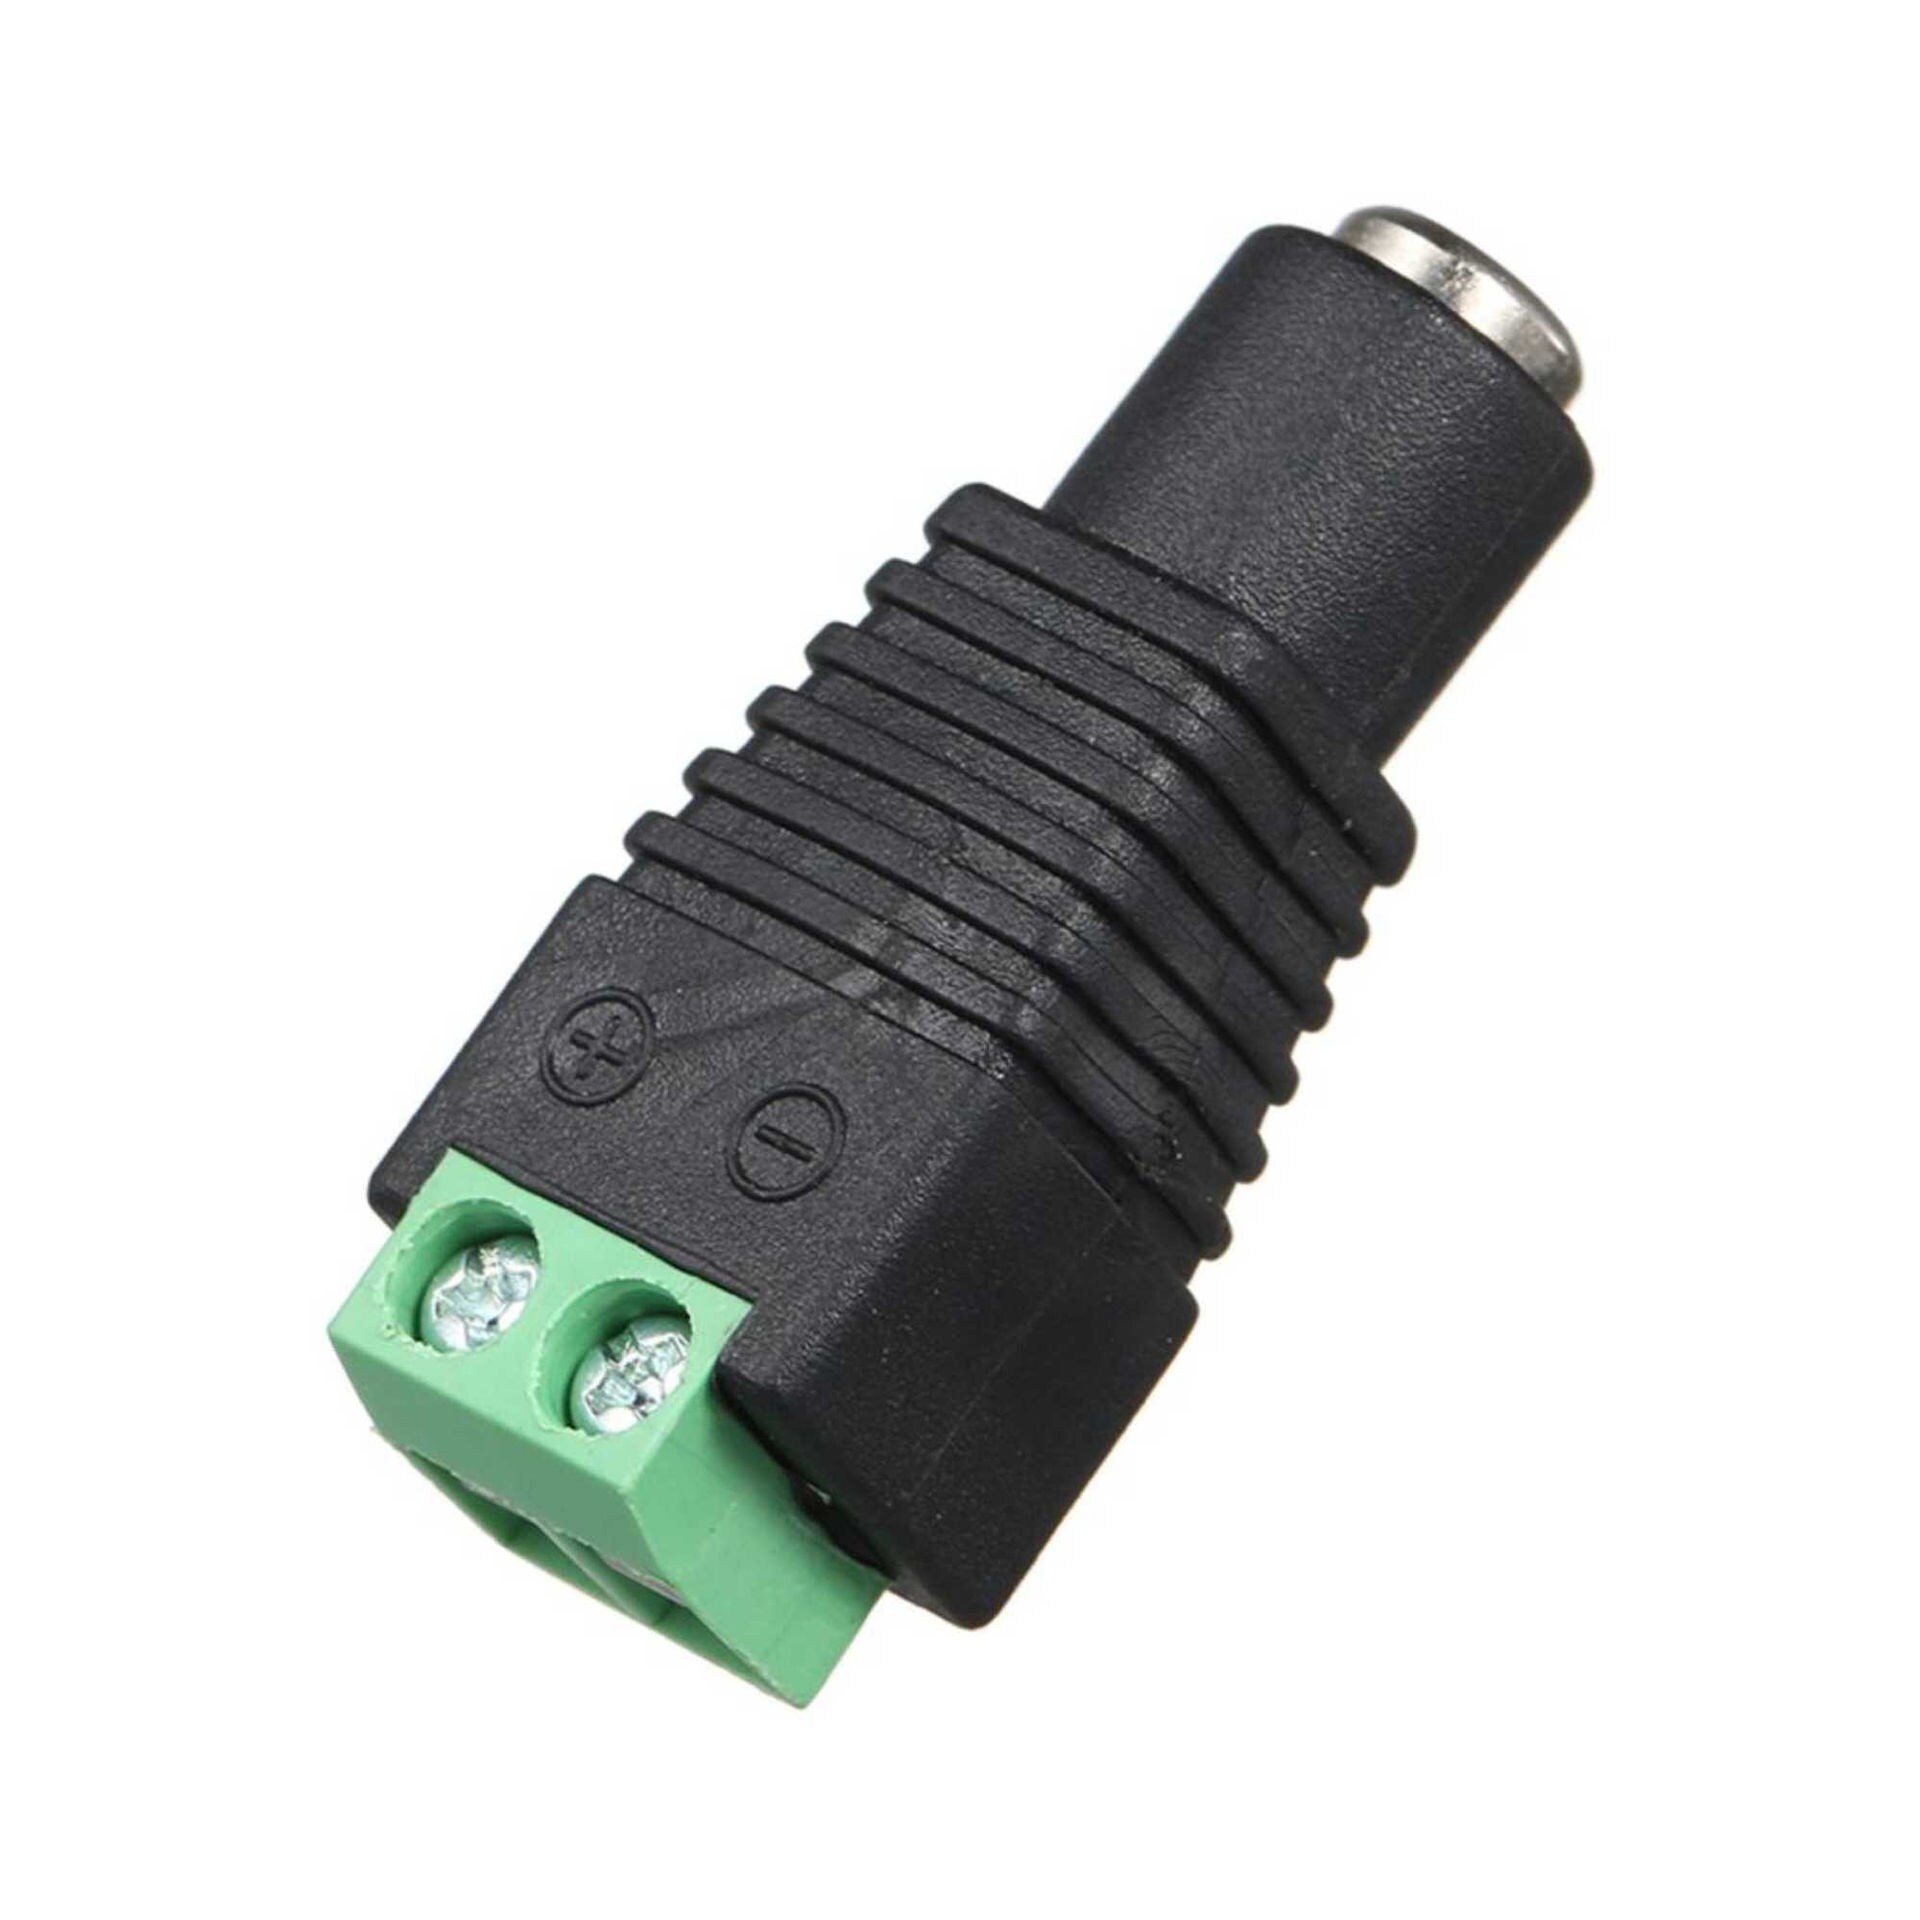 Rkn Power Adapter Female Connector Plug For Led Strip Light, Black & Green